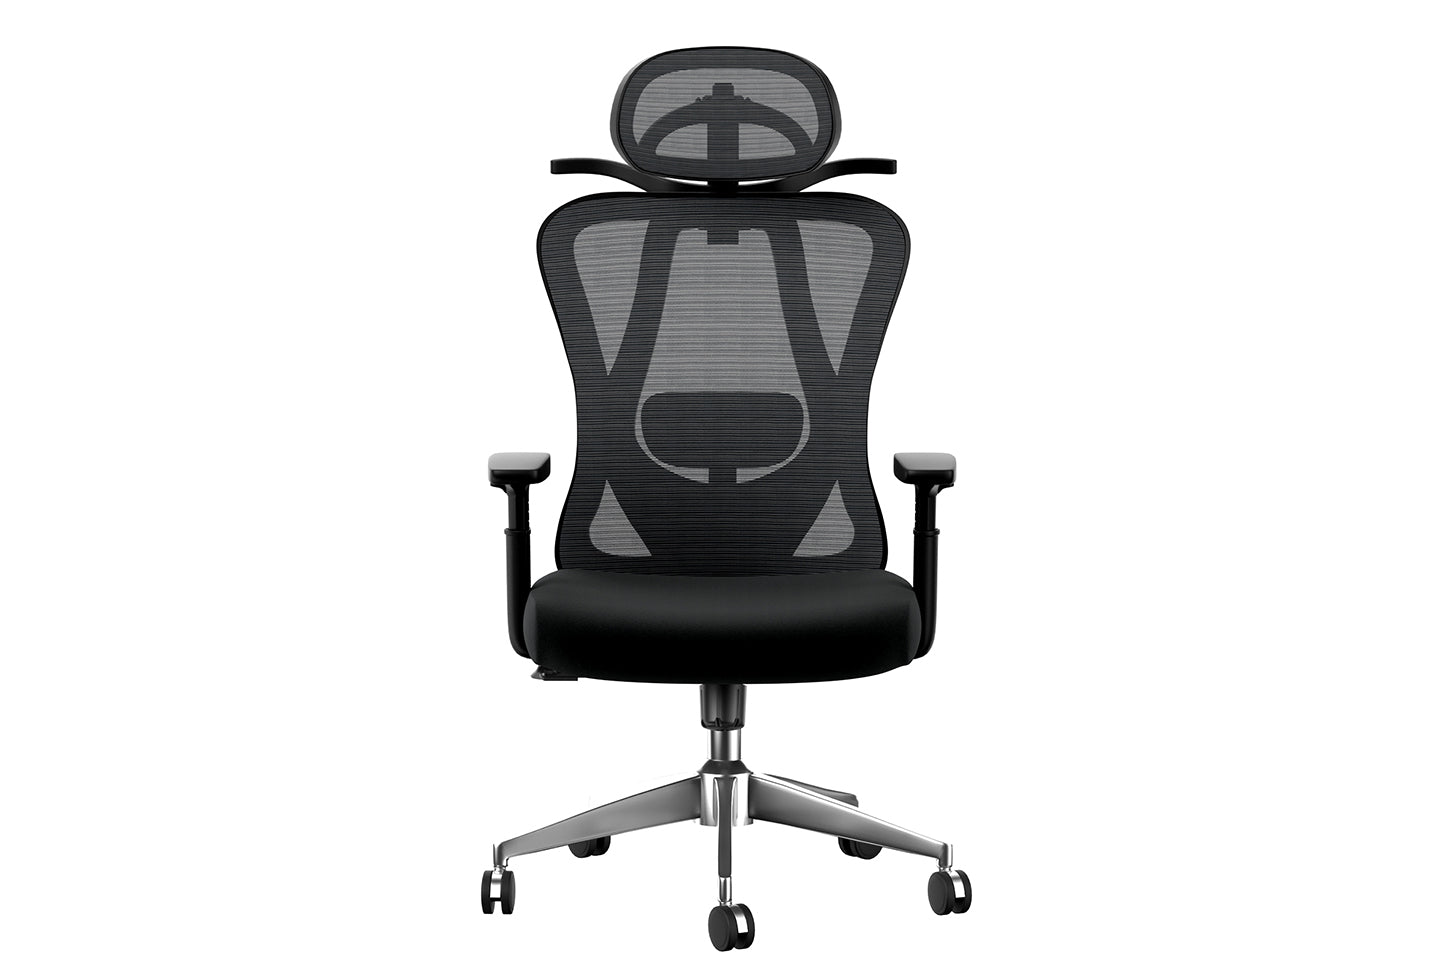 Ergonomic Mesh Office Chair High Back Home Office Desk Chair with Adjustable Headrest, Armrests, Lumbar Support